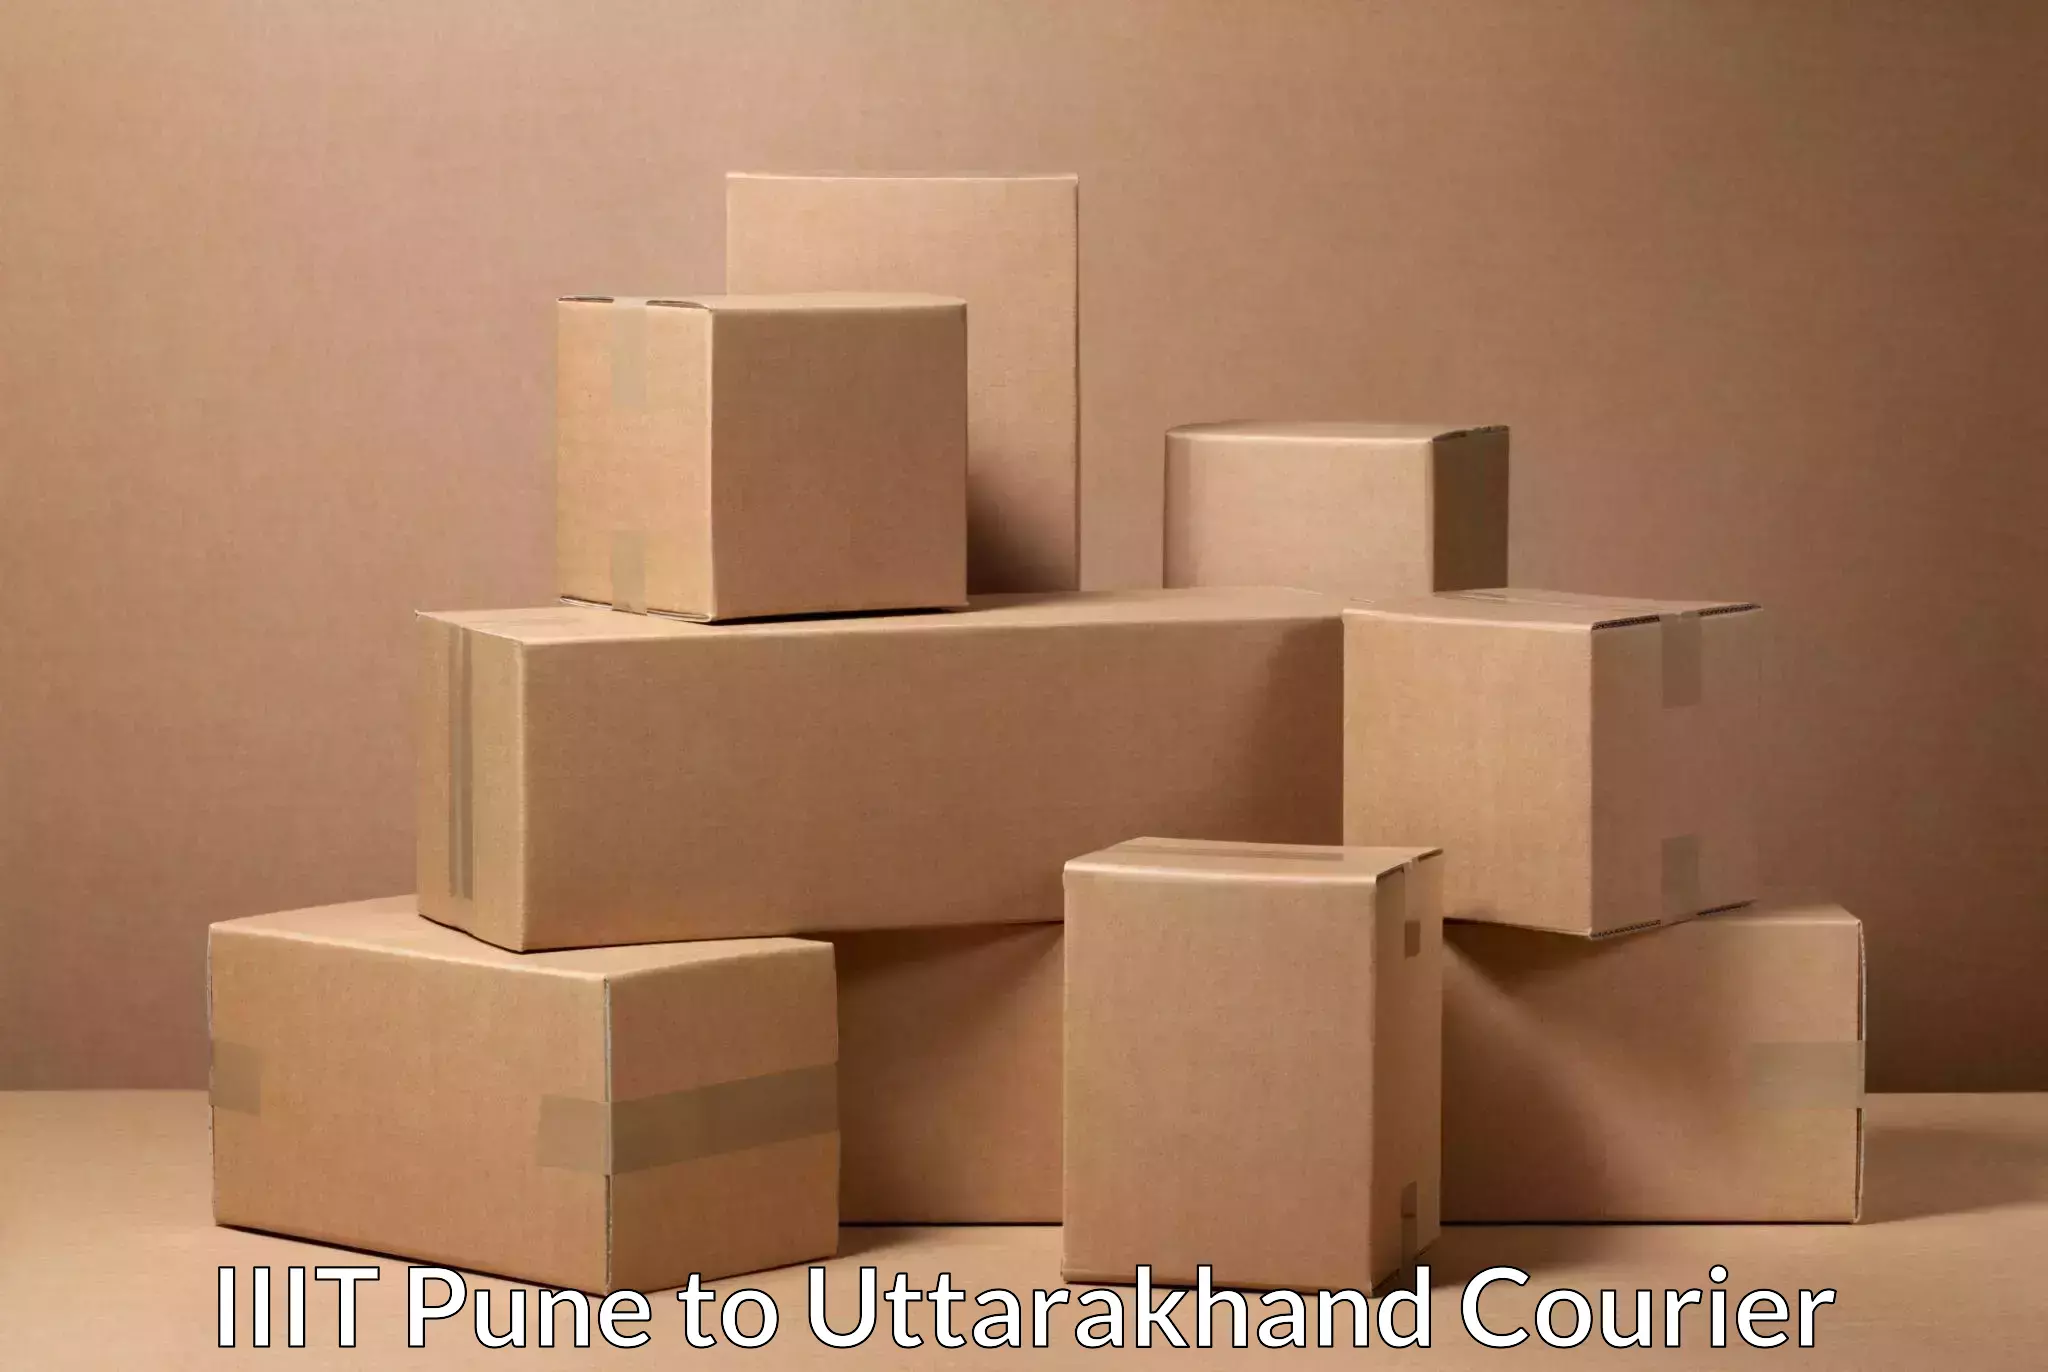 Reliable parcel services IIIT Pune to Gairsain